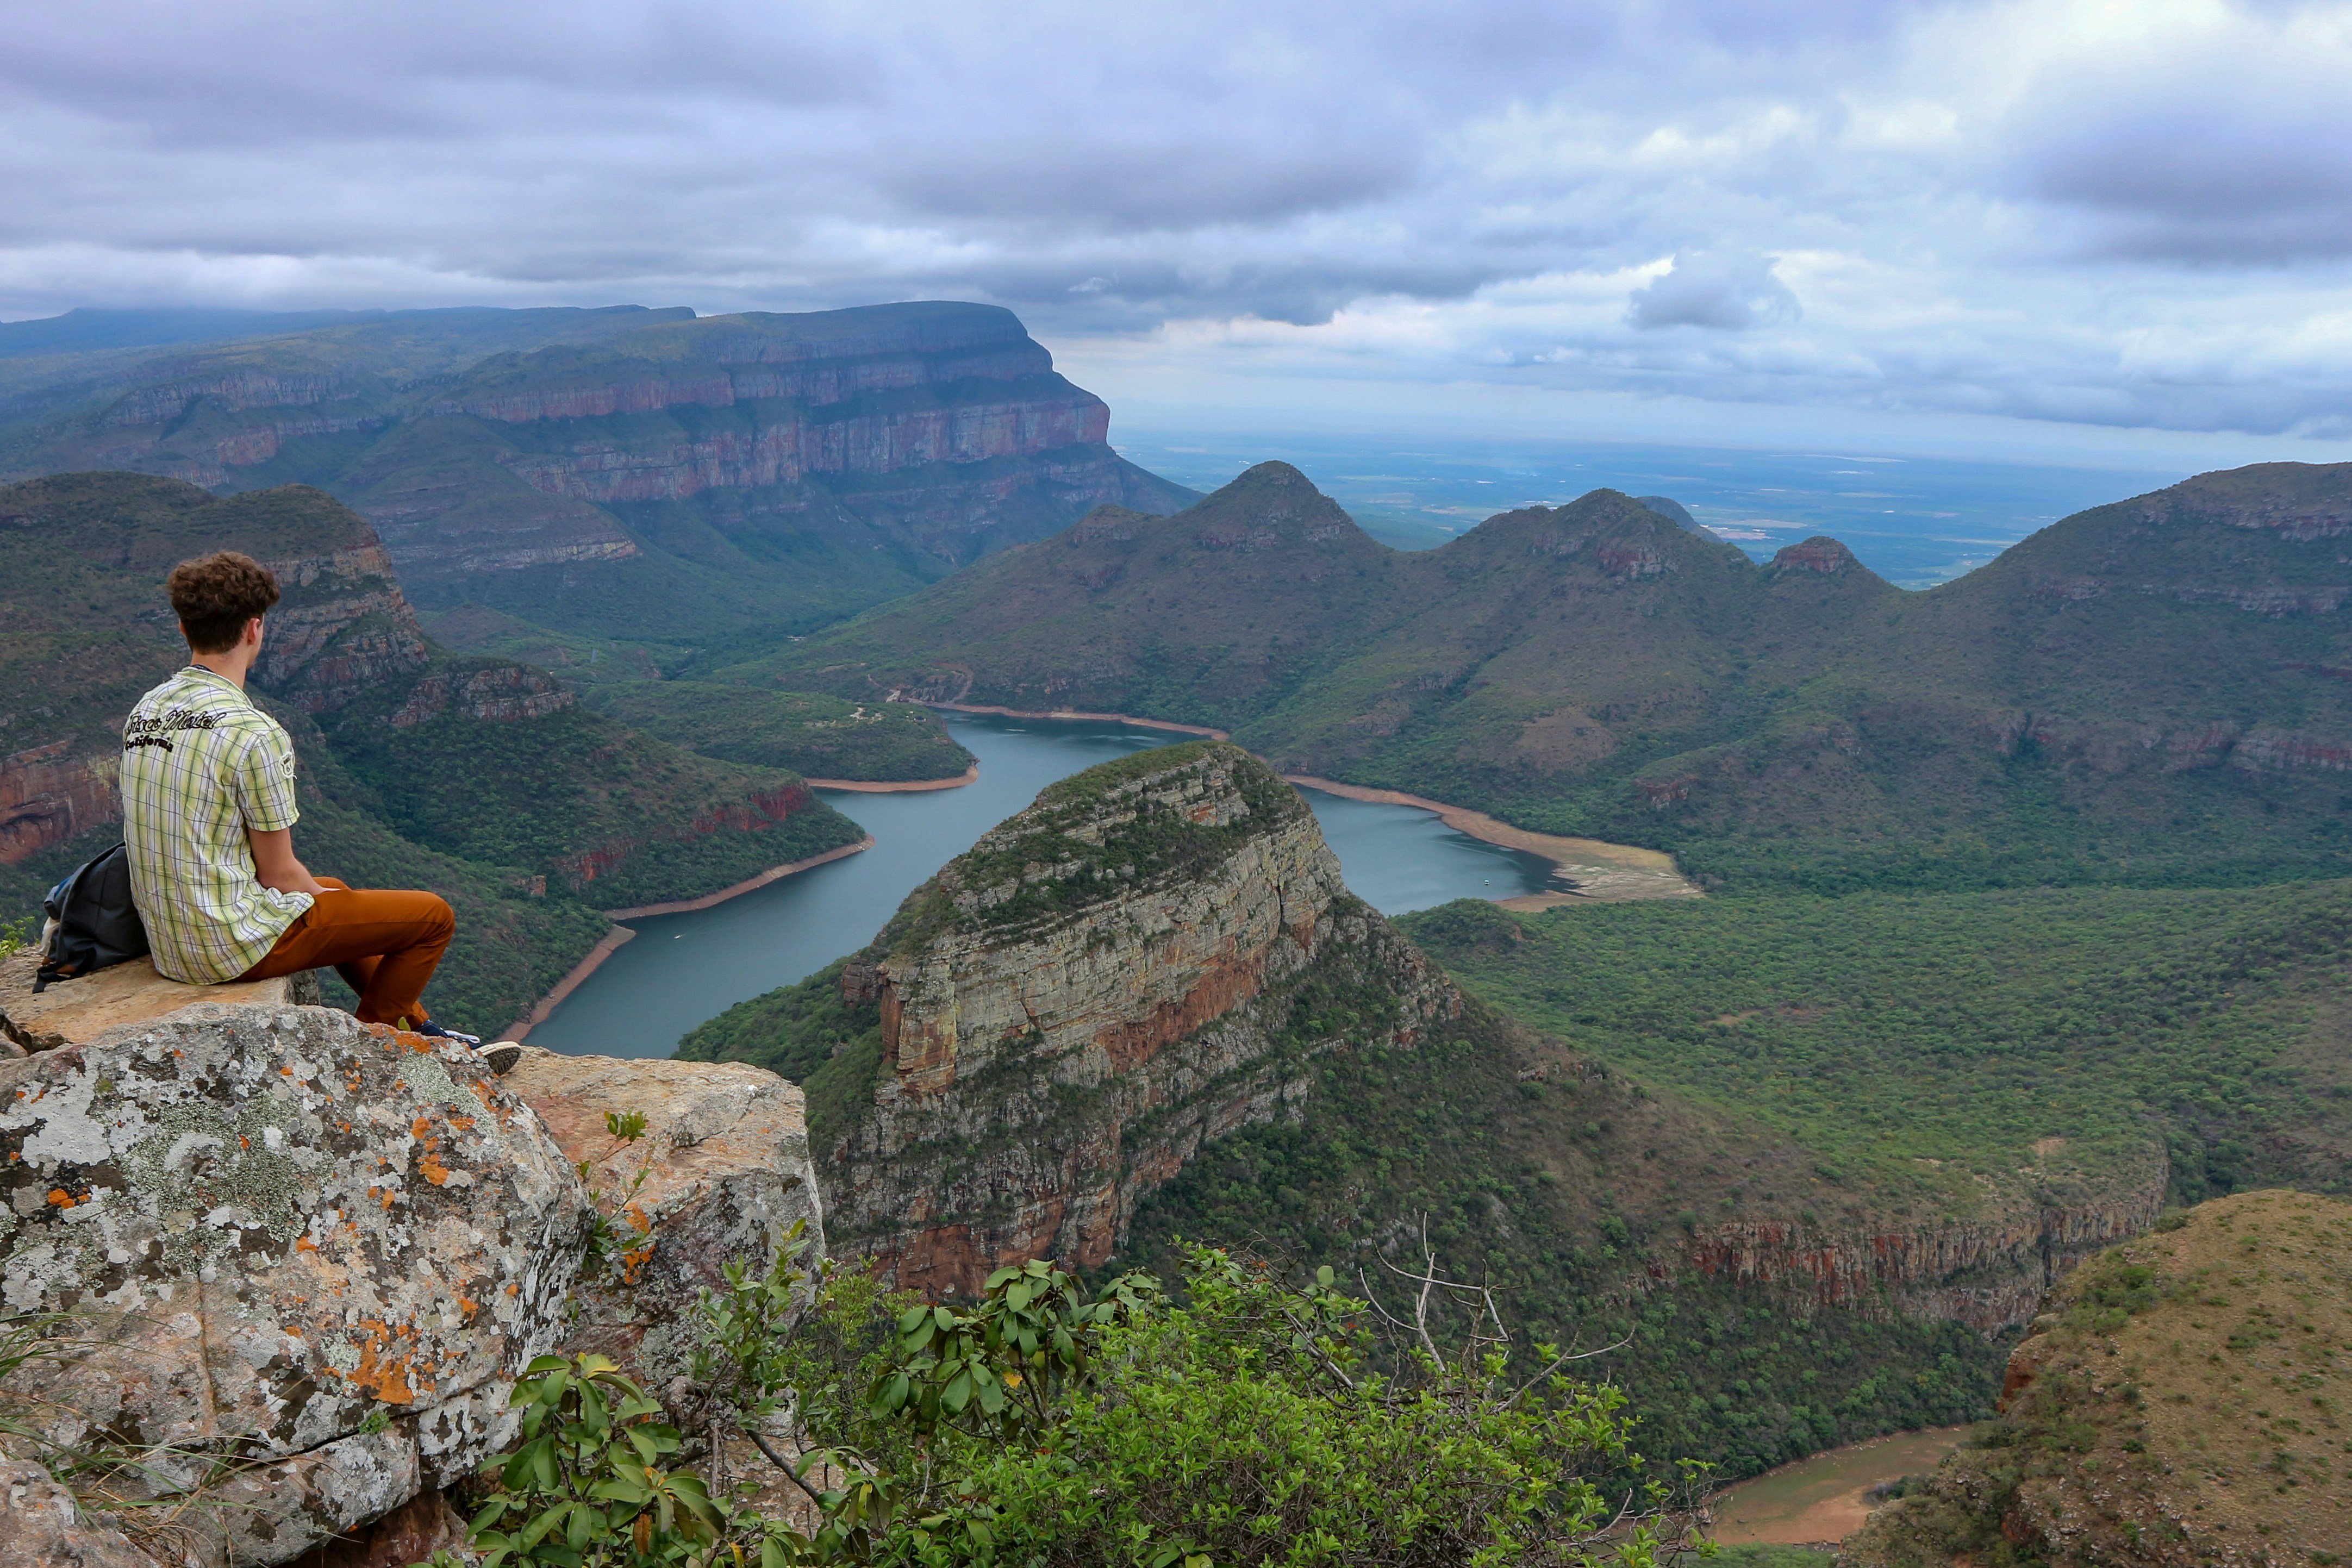 Blyde River Canyon, Mpumulanga. Second largest canyon in Africa.